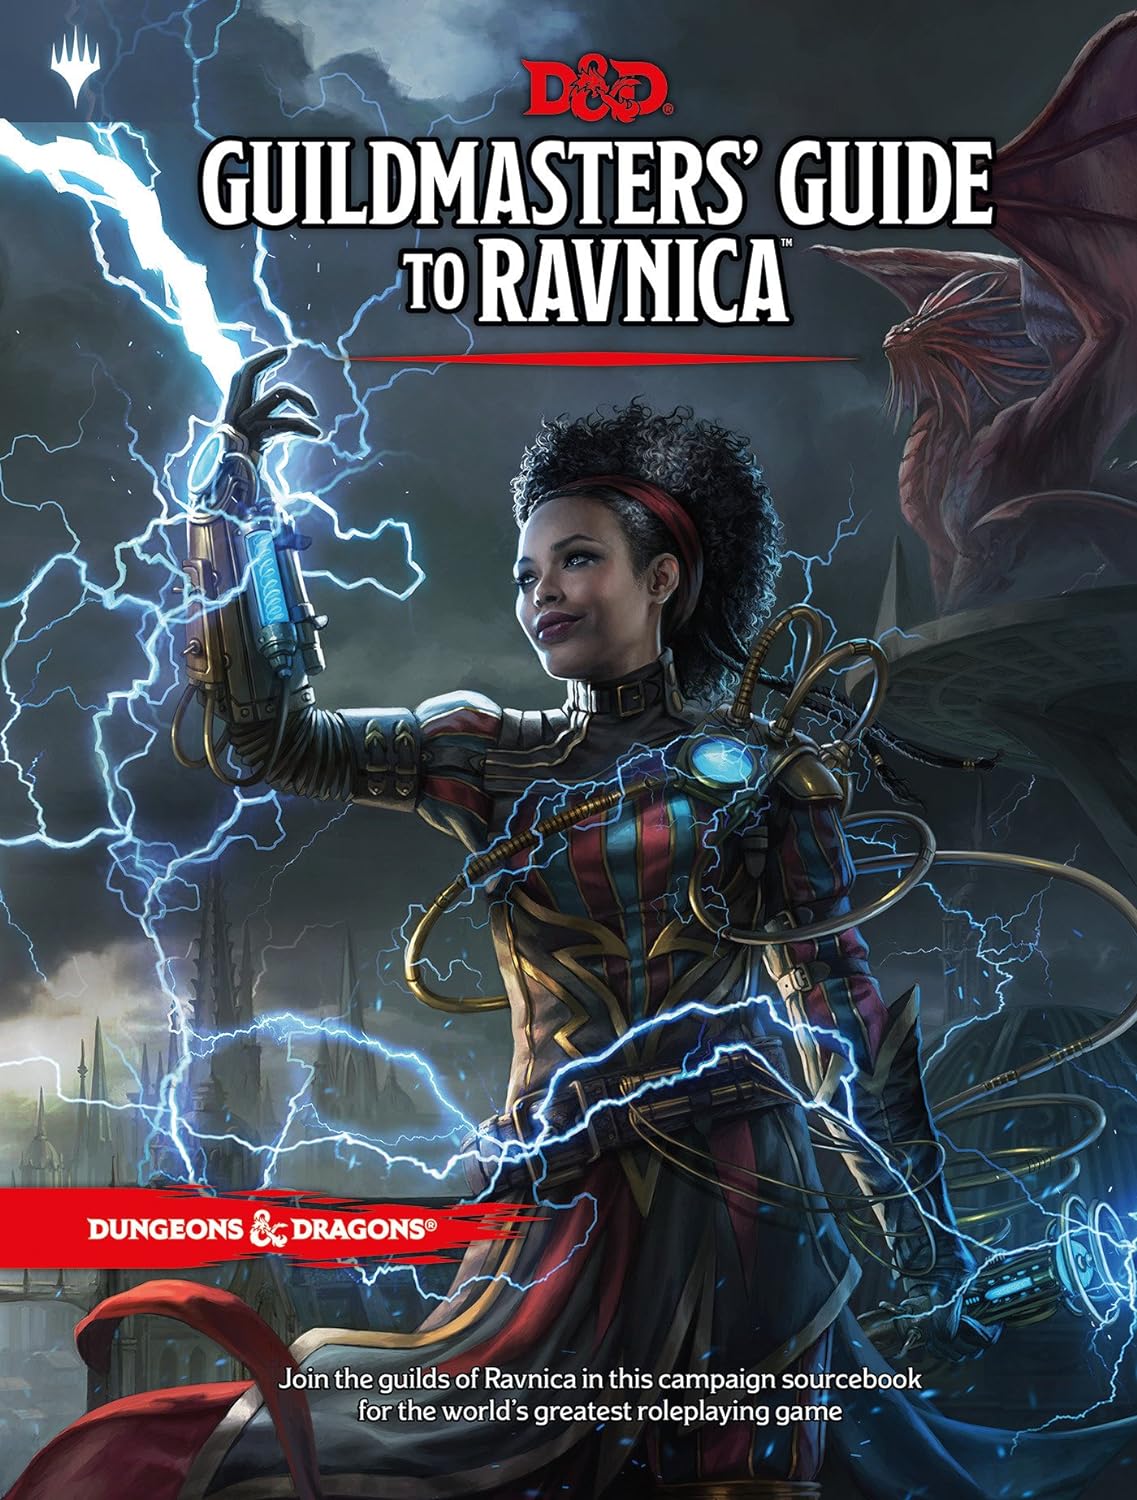 Dungeons & Dragons 5e: Guildmasters' Guide to Ravnica